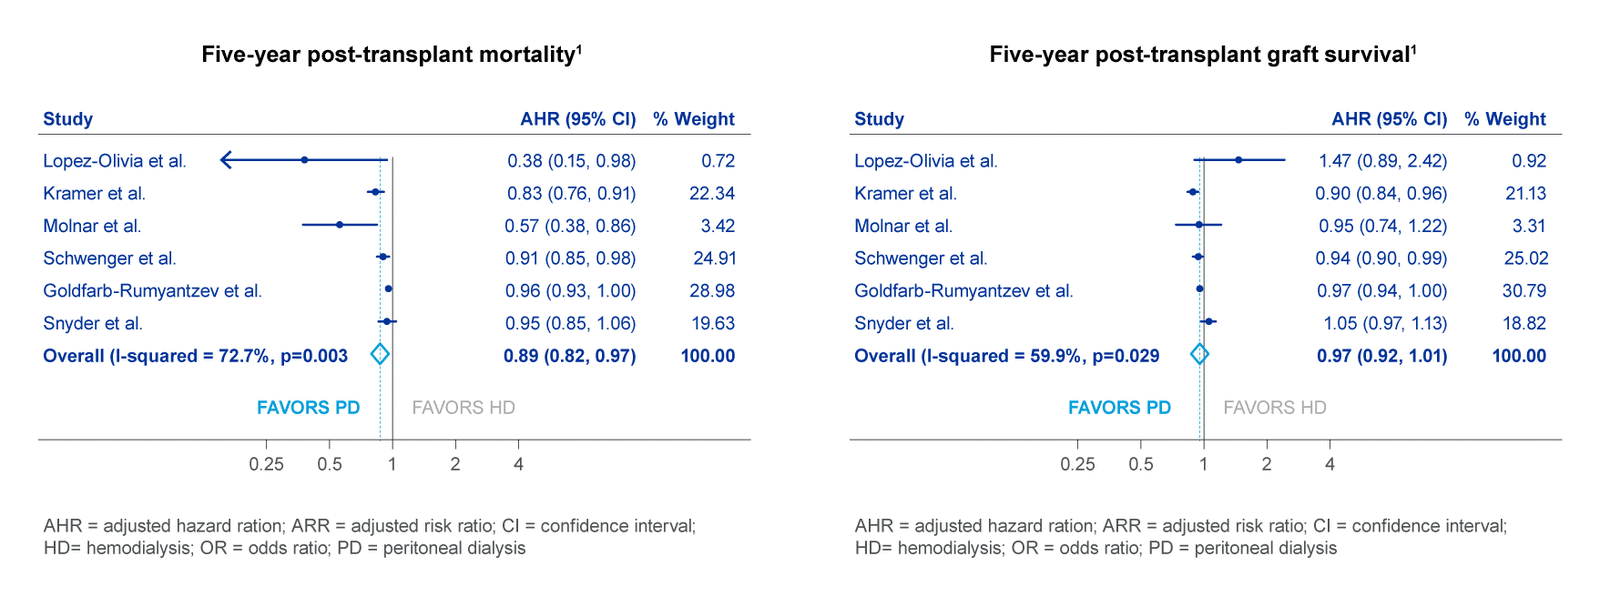 Charts showing five-year post-transplant mortality and graft survival